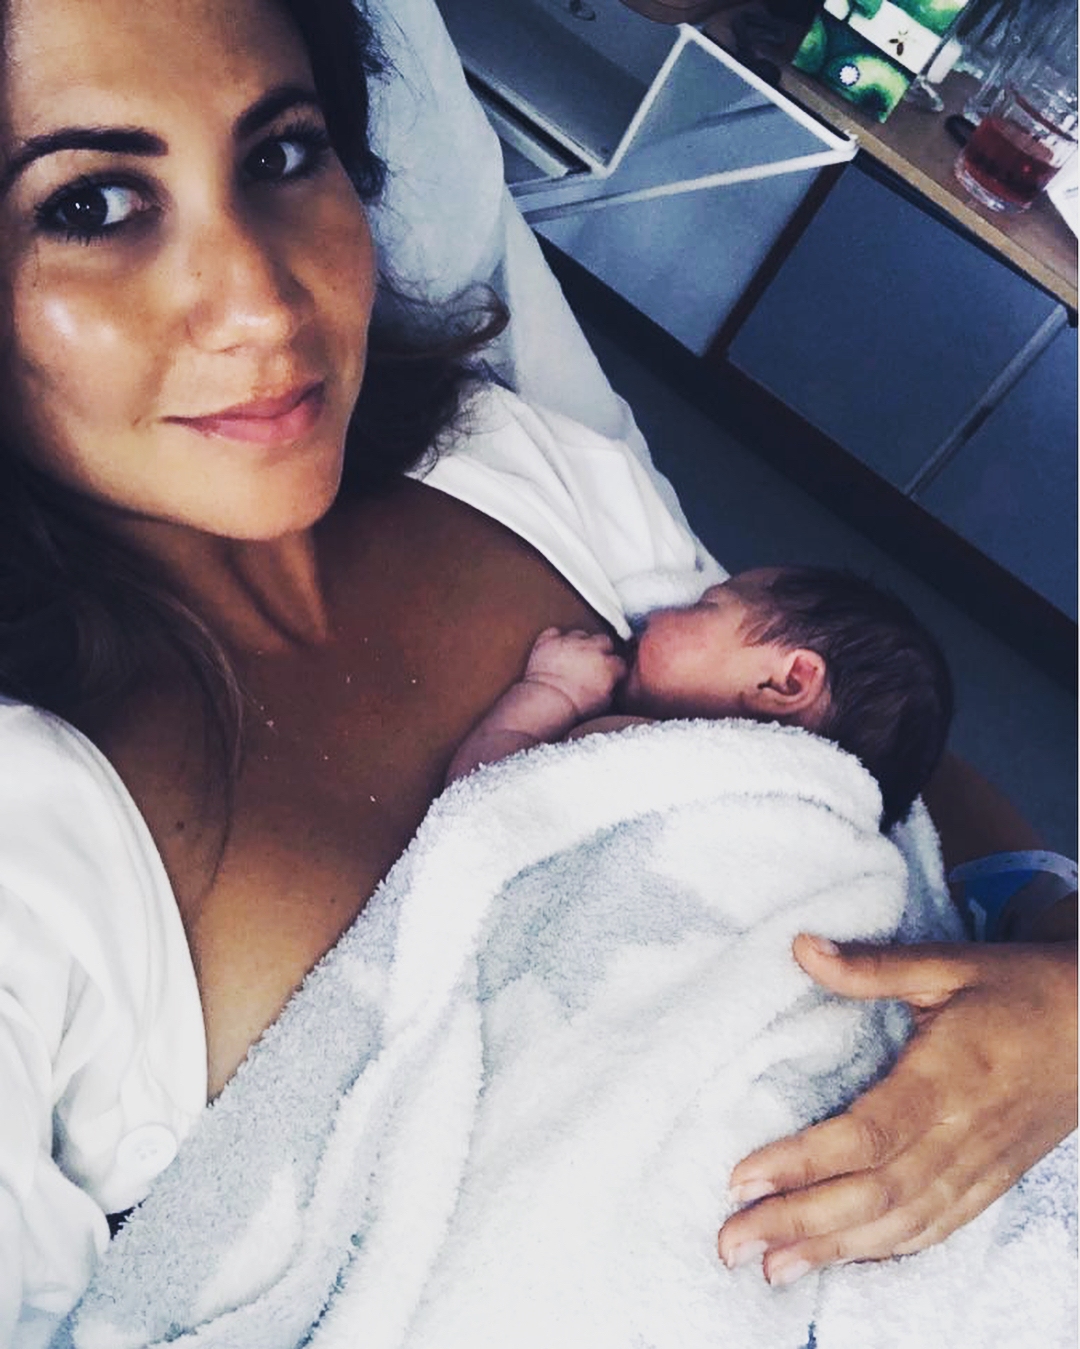 Welcome to the world « you perfect little superhero » !